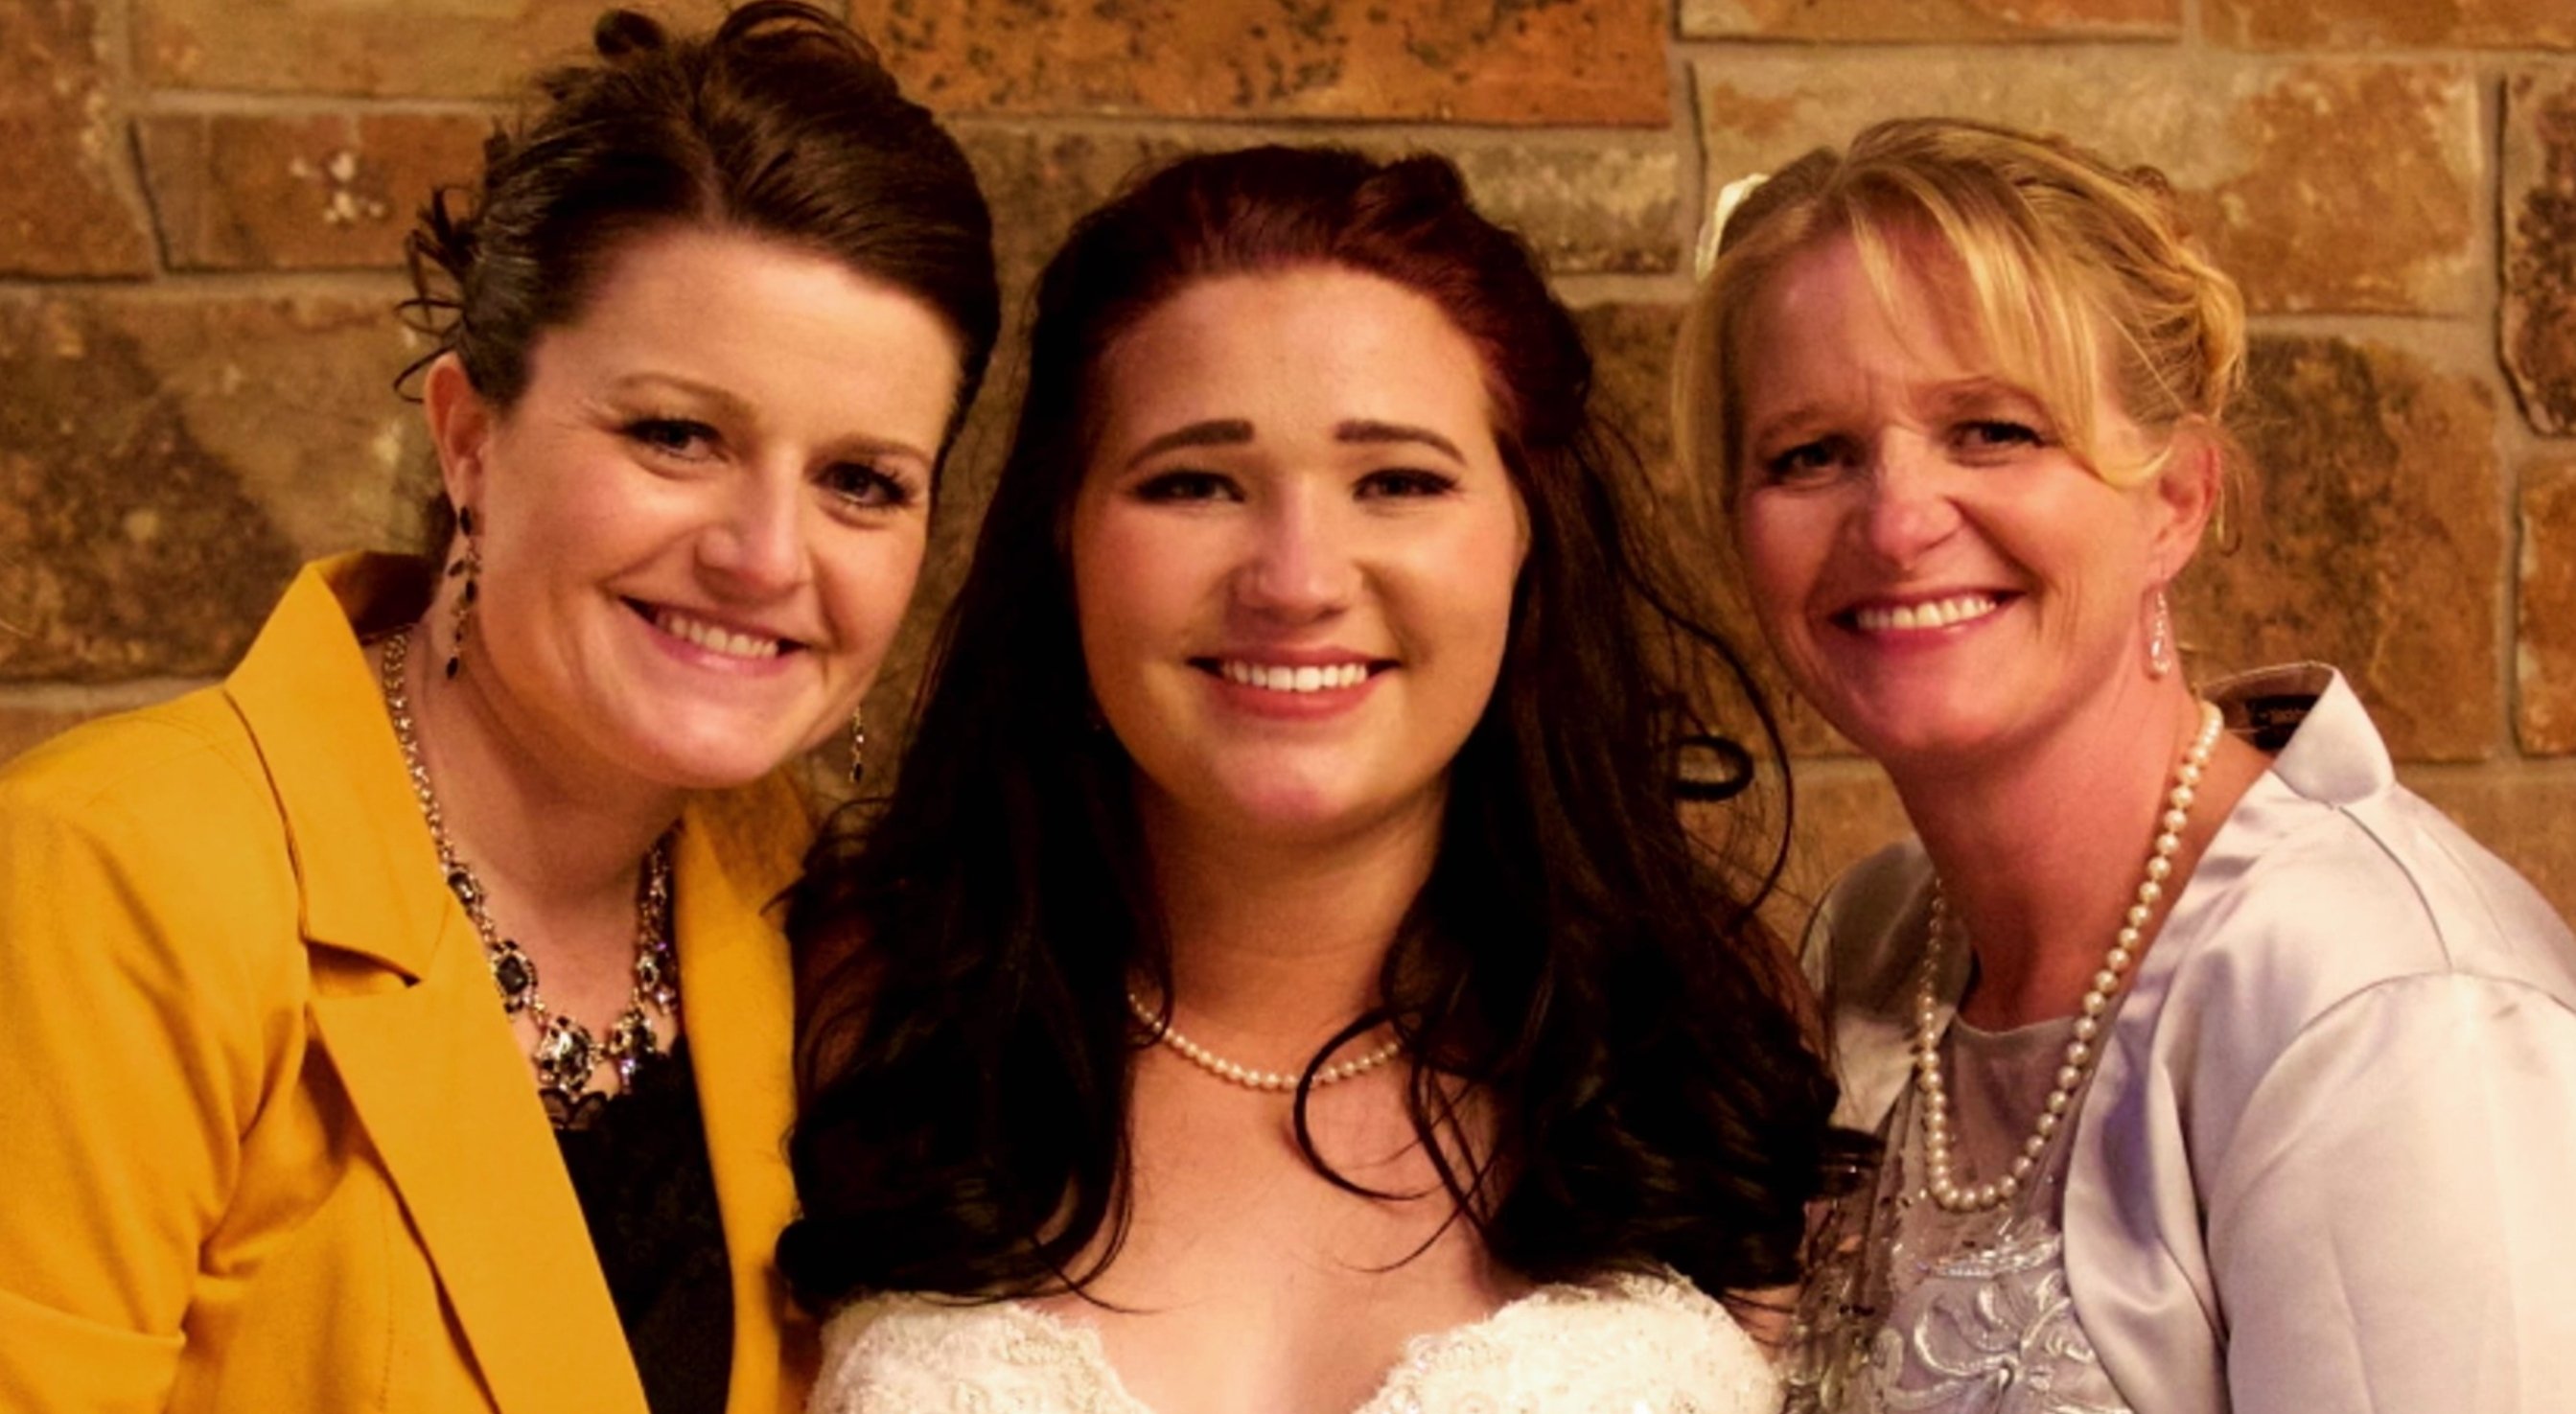 Robyn Brown and Christine Brown posing with Mykelti Brown on her wedding day to Tony Padron on 'Sister Wives' for TLC.